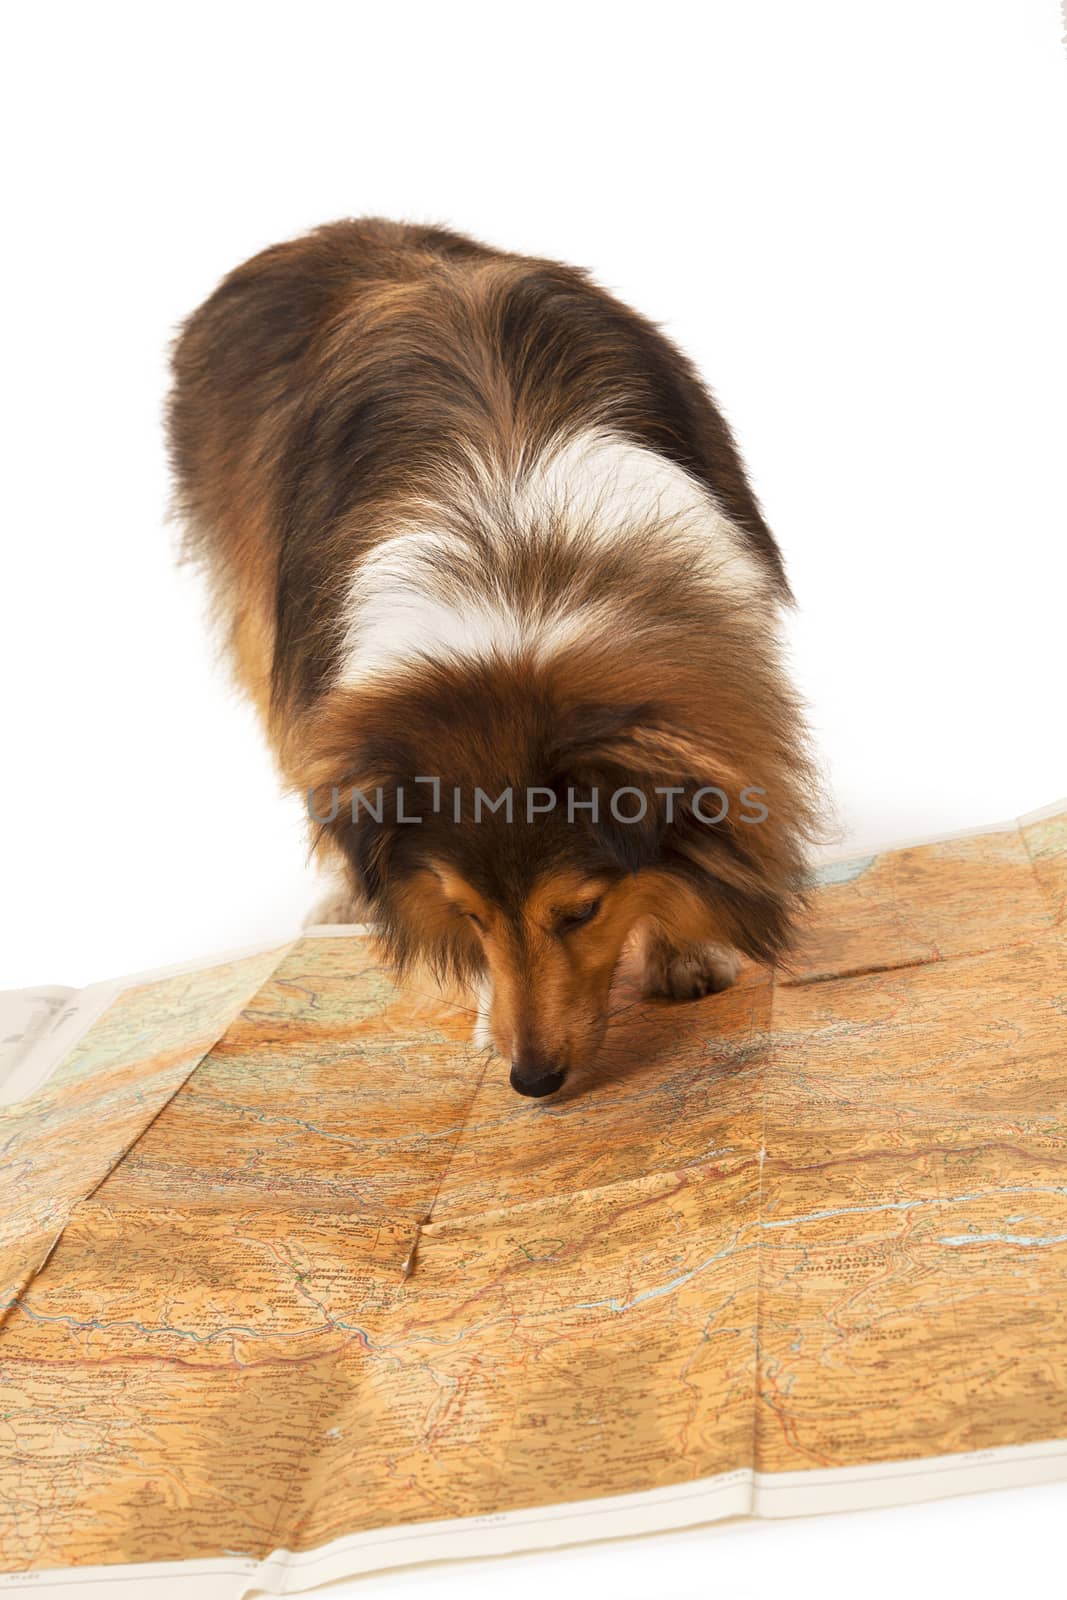 Dog looking at map by Aarstudio